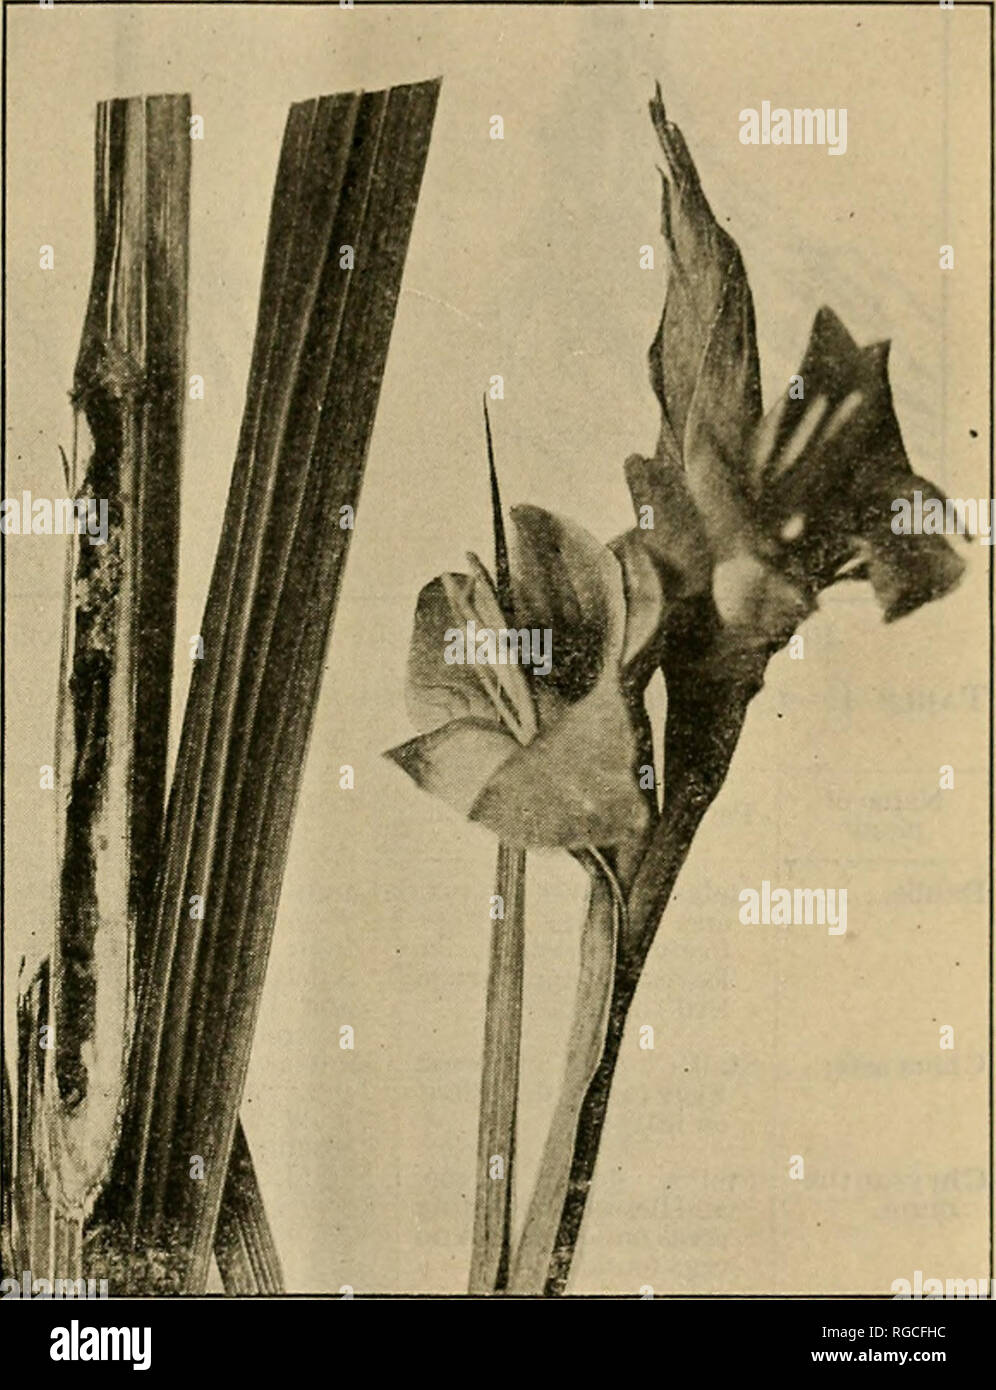 . Bulletin of the U.S. Department of Agriculture. Agriculture; Agriculture. PROGRESS REPORT OX Till', KUROPEAN CORN BORER 39 FLOWERING PLANTS Although a large number of flowering plants are known to be attacked by P. nubUalis (Table 1), the most important of tin- group, considering their susceptibility and economic importance, are dahlia, China aster, chrysanthemum, zinnia, calendula, carina, cosmos, geranium, gladiolus (fig. 19), golden glow, hollyhock, ana salvia. A summary of the more important observations relating to these plants is included in Table 4. With the exception of cosmos and da Stock Photo